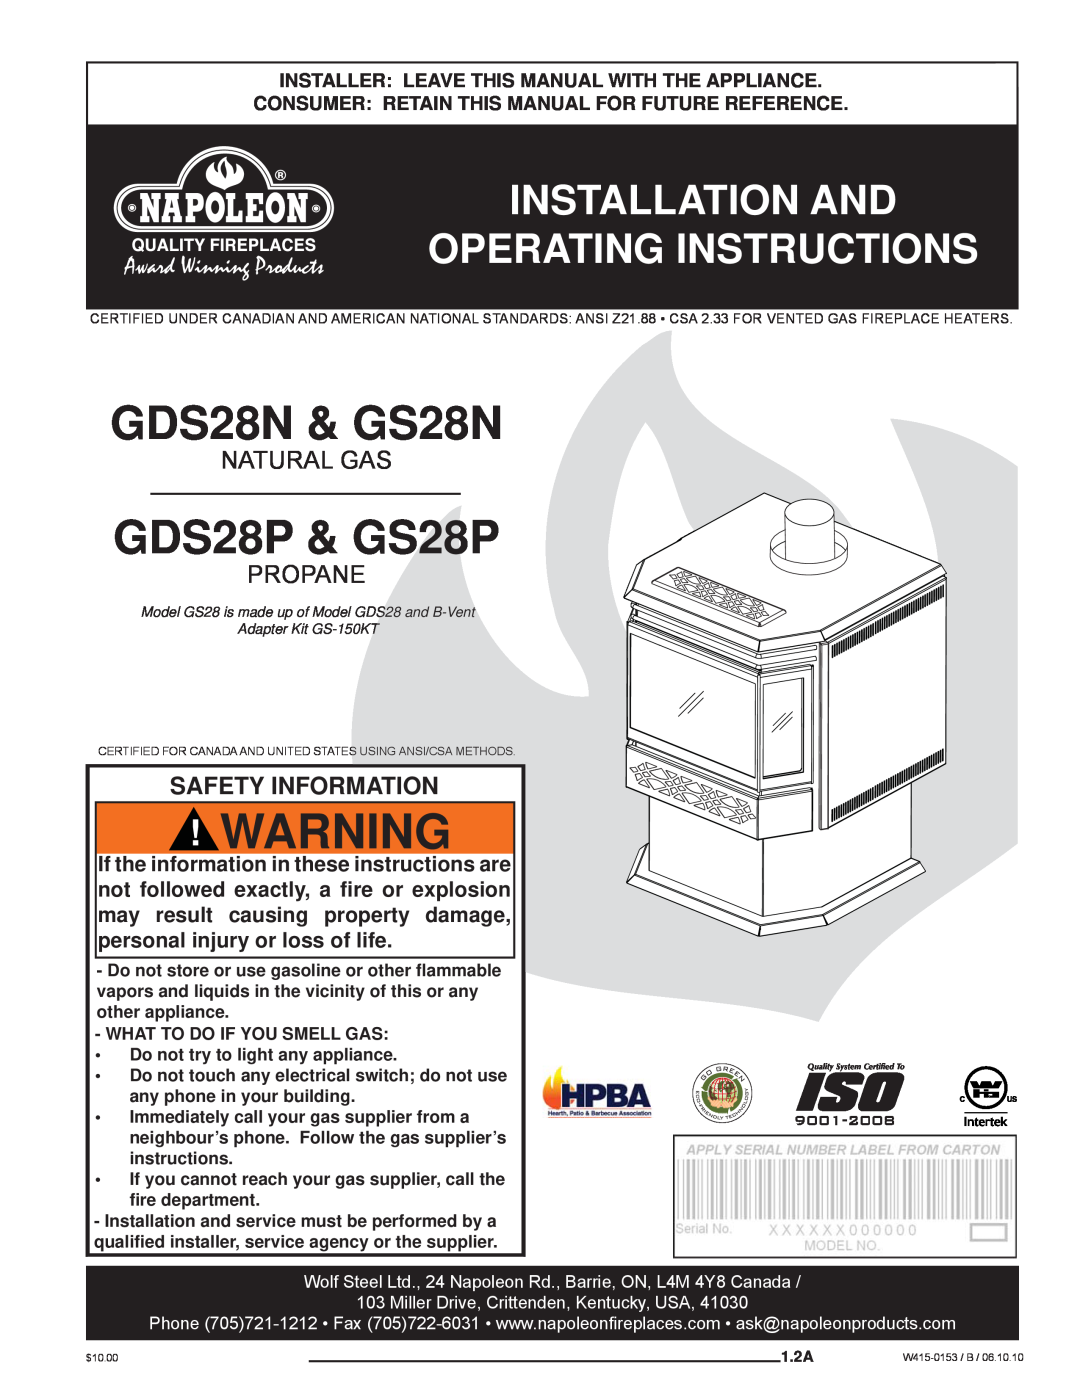 Napoleon Fireplaces manual Installer Leave This Manual With The Appliance, GDS28N & GS28N, GDS28P & GS28P, Natural Gas 